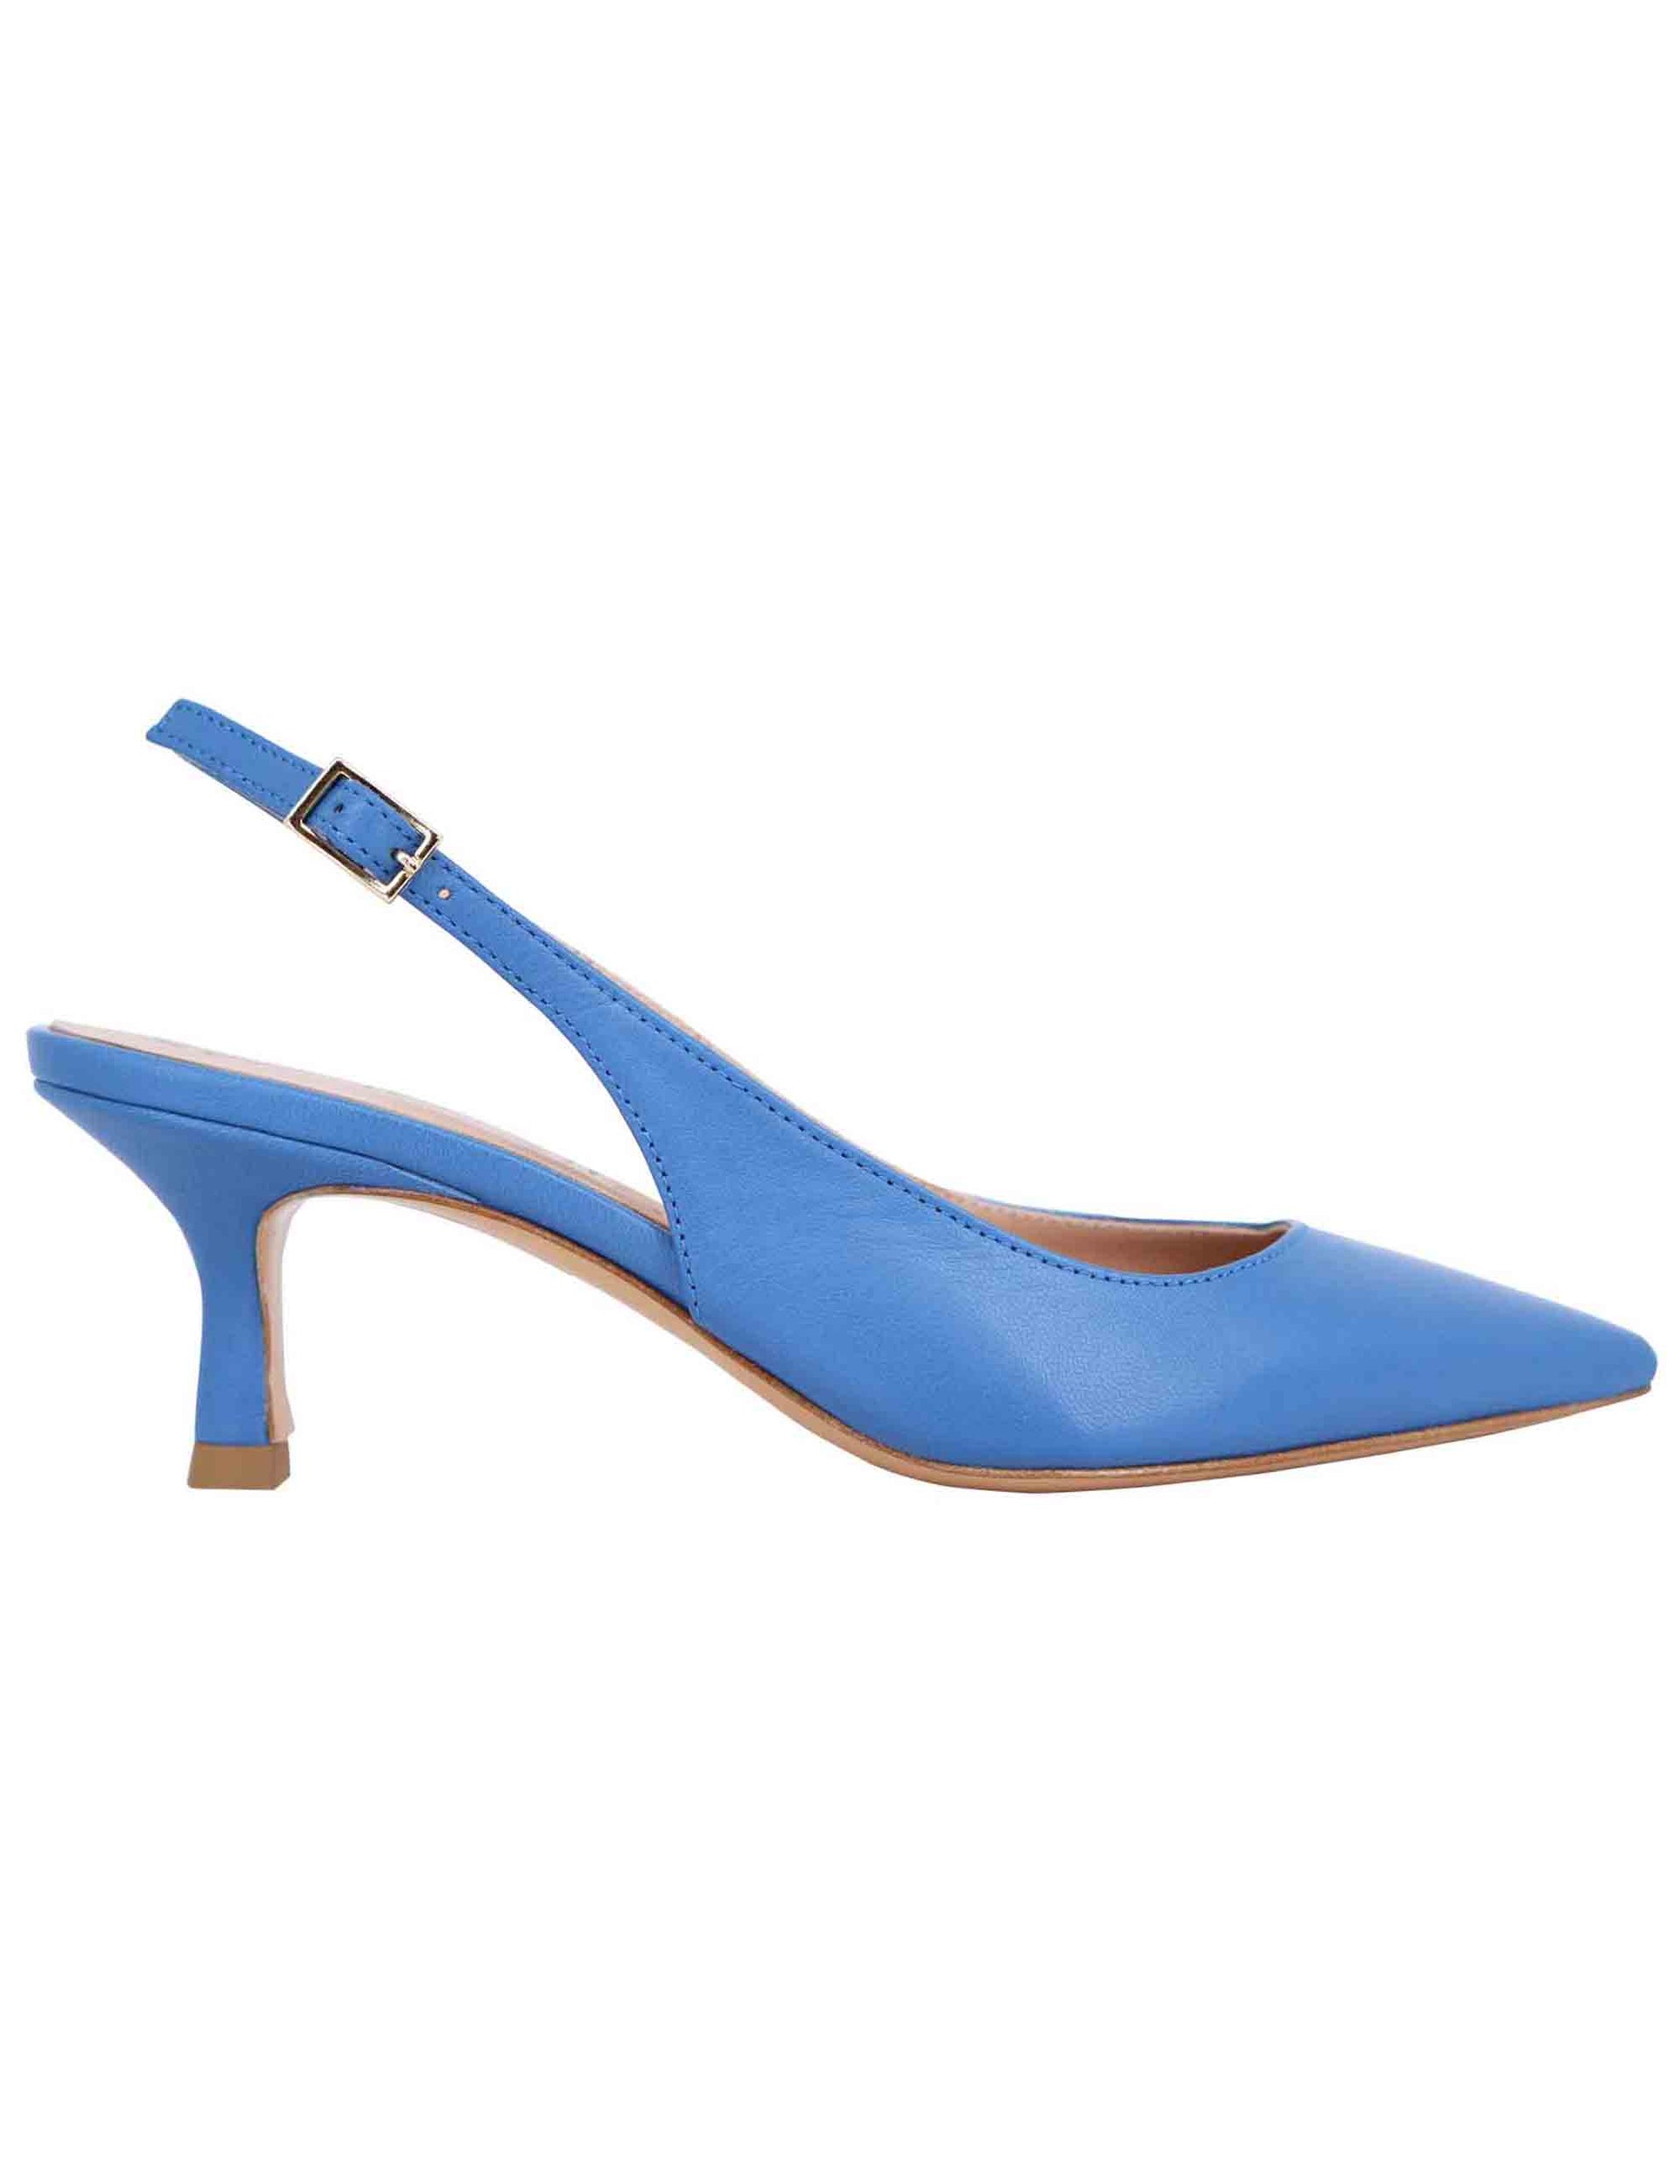 Women's slingback pumps in blue leather with low heel